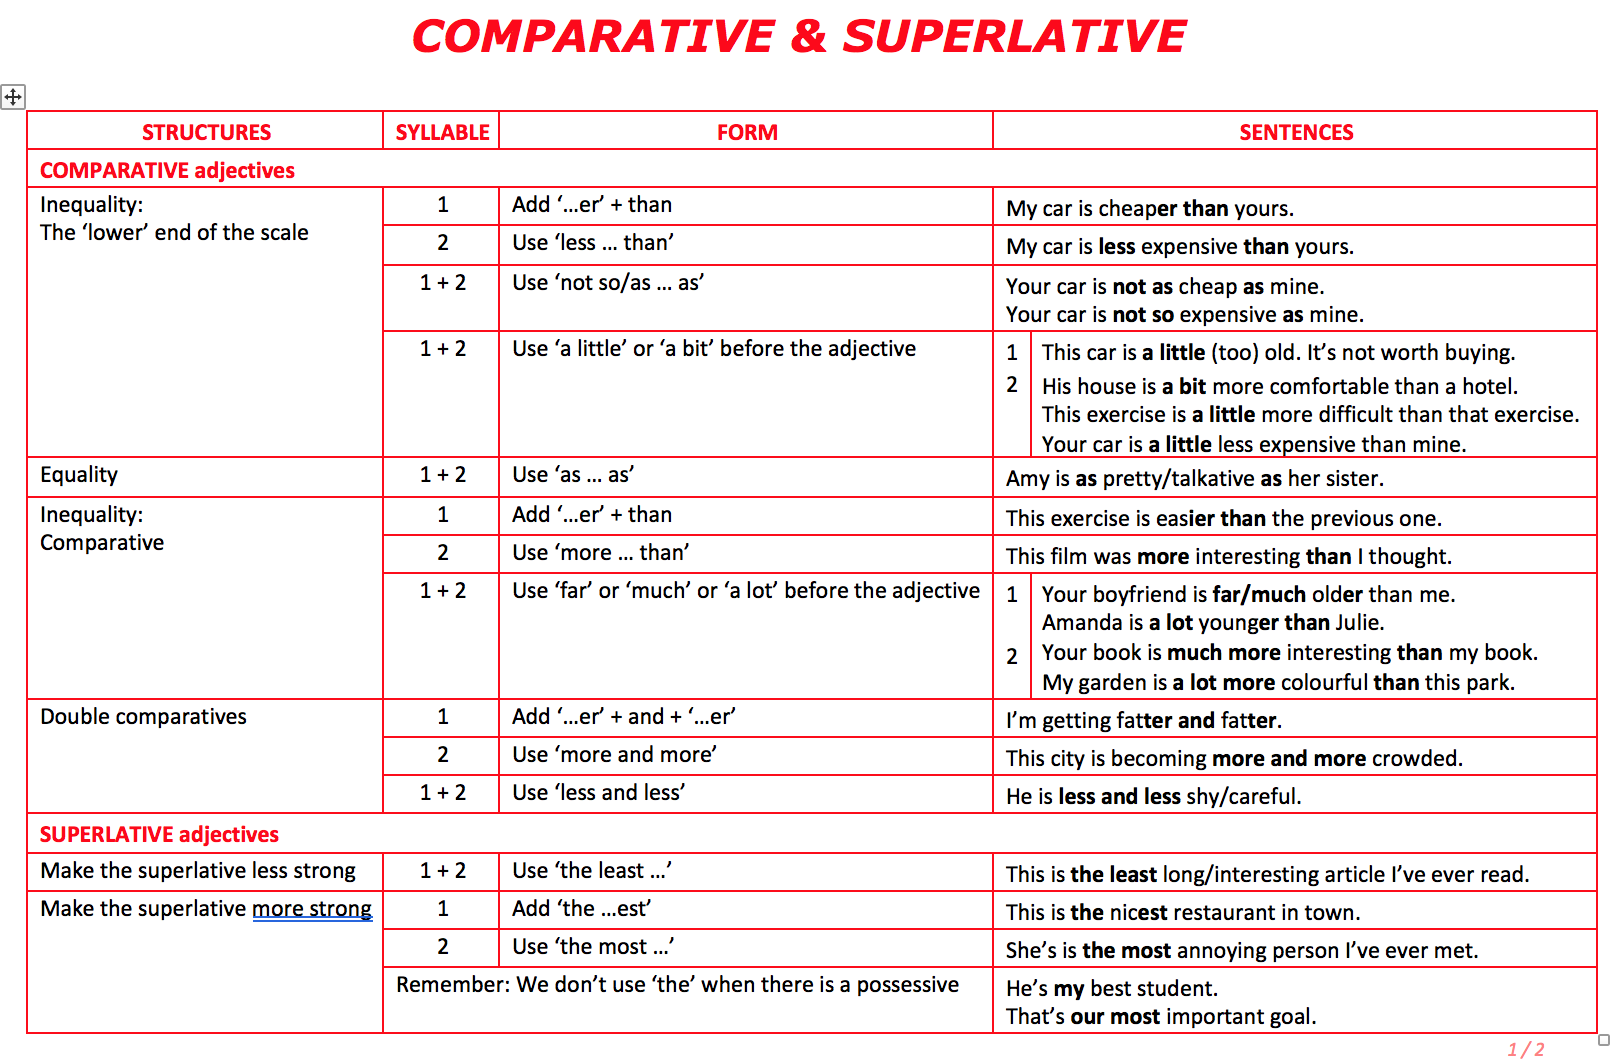 Comparatives and Superlatives правило. Degrees of Comparison of adjectives правило. Comparatives and Superlatives Rule. Adjective Comparative Superlative таблица. Young comparative and superlative